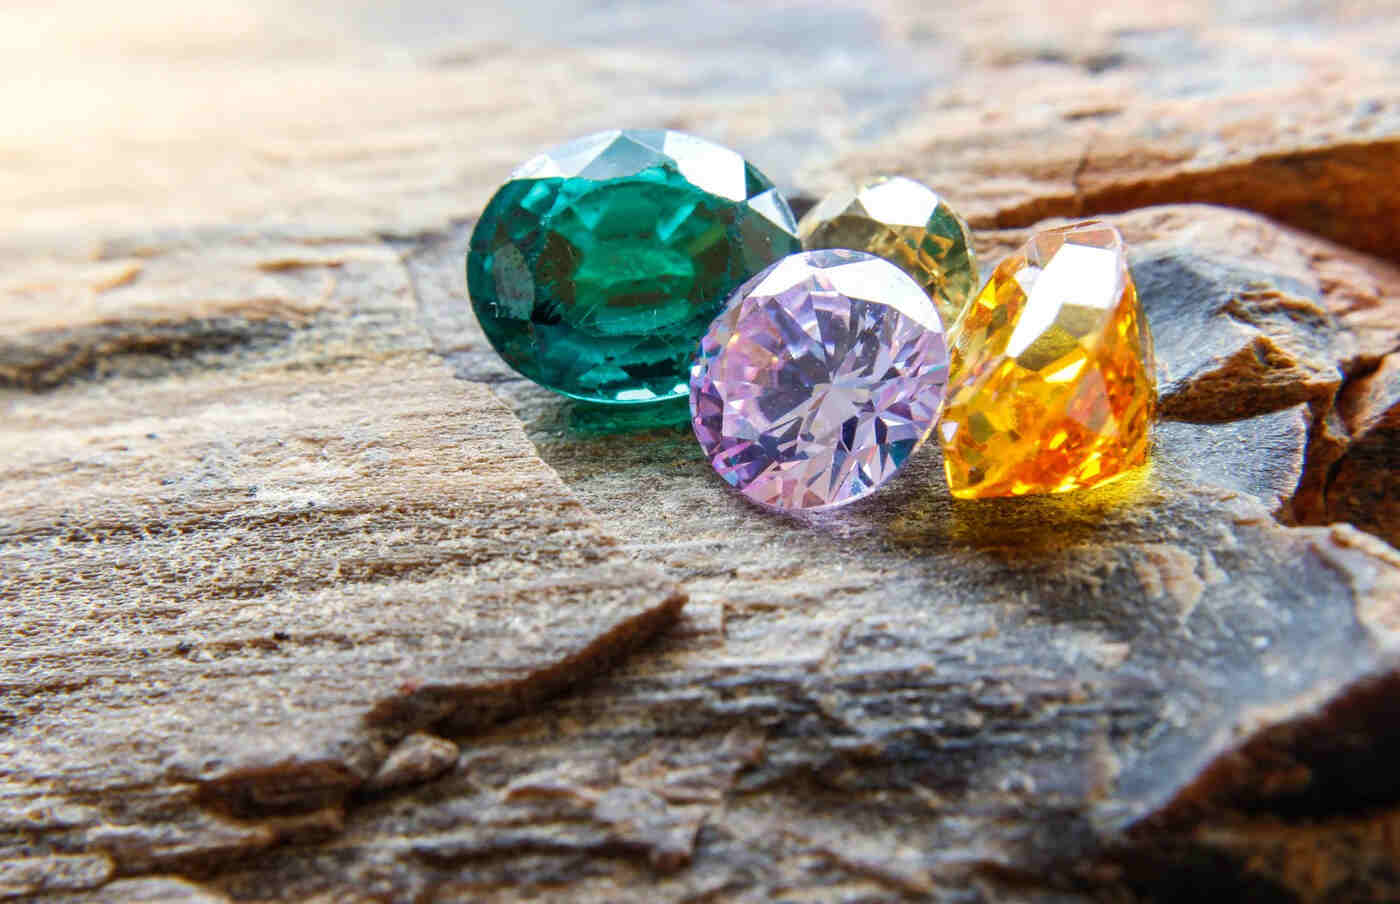 How Long Does A Gemstone Take To Work?